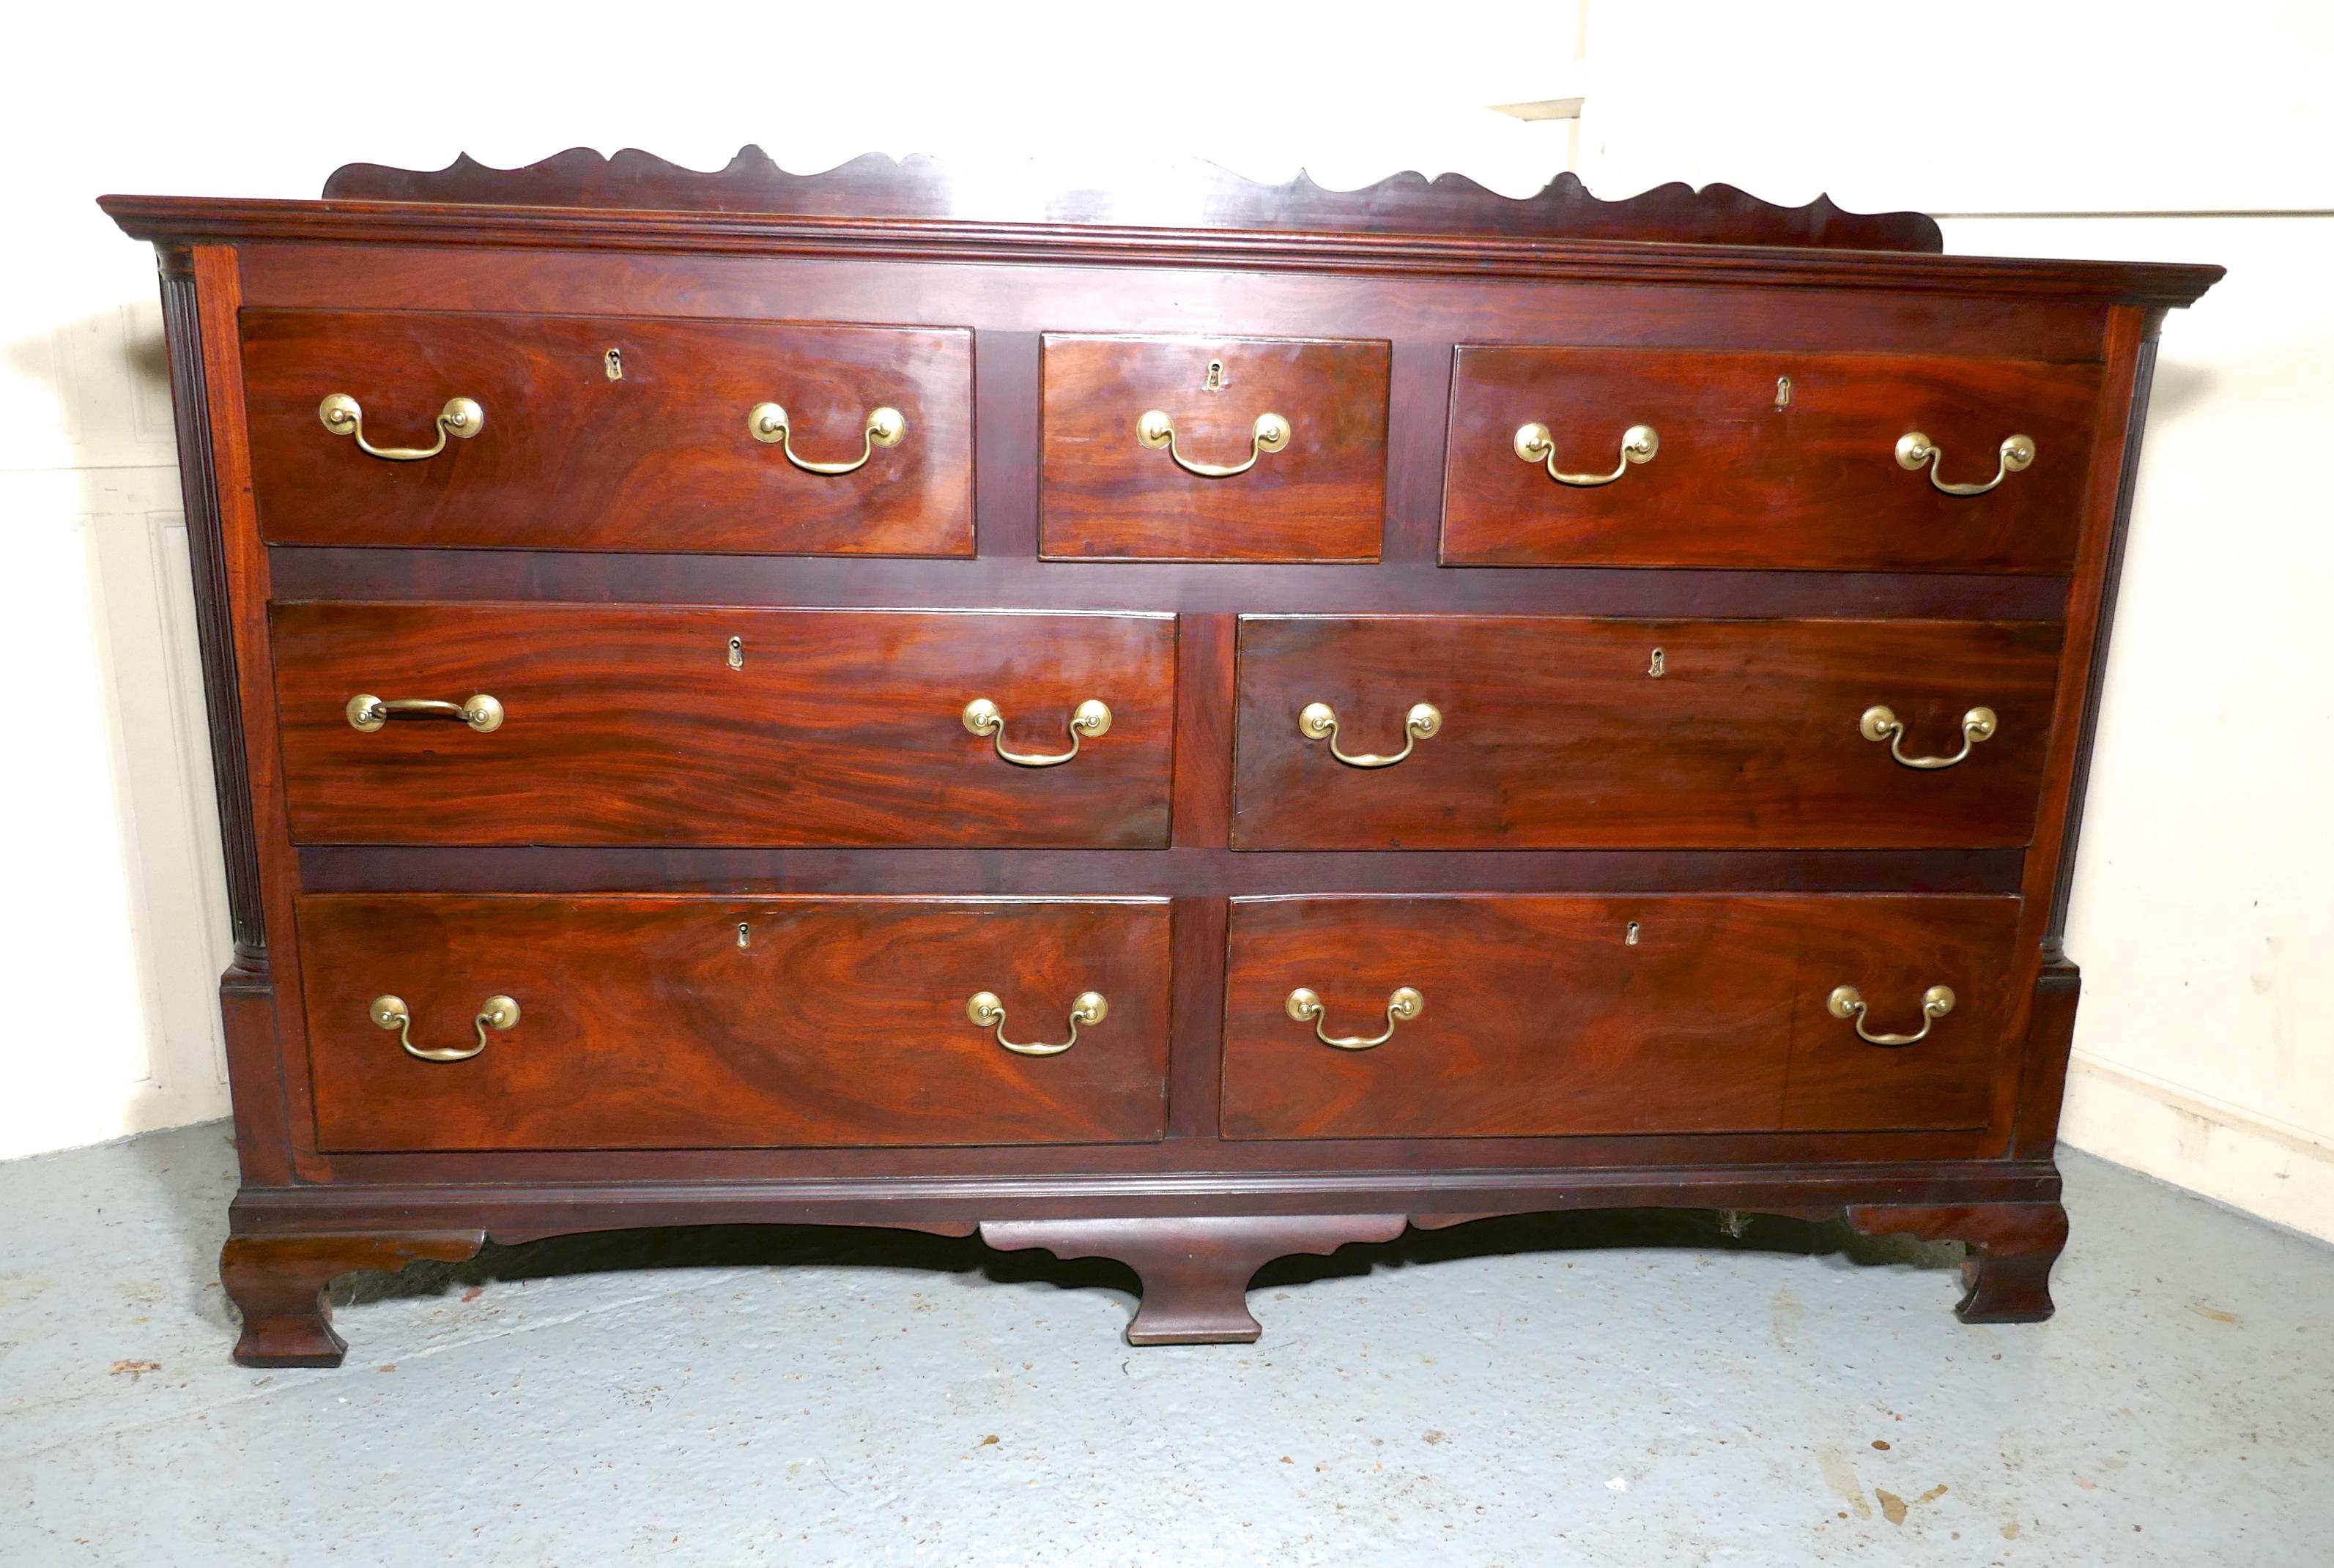 Large 18th Century Lancashire Chest of Drawers George III Dresser

This is an exceptionally fine quality piece, this is an 18th century George III chest of Drawers or Dresser circa 1780, it is oak lined and has an oak planked back
The chest has 7